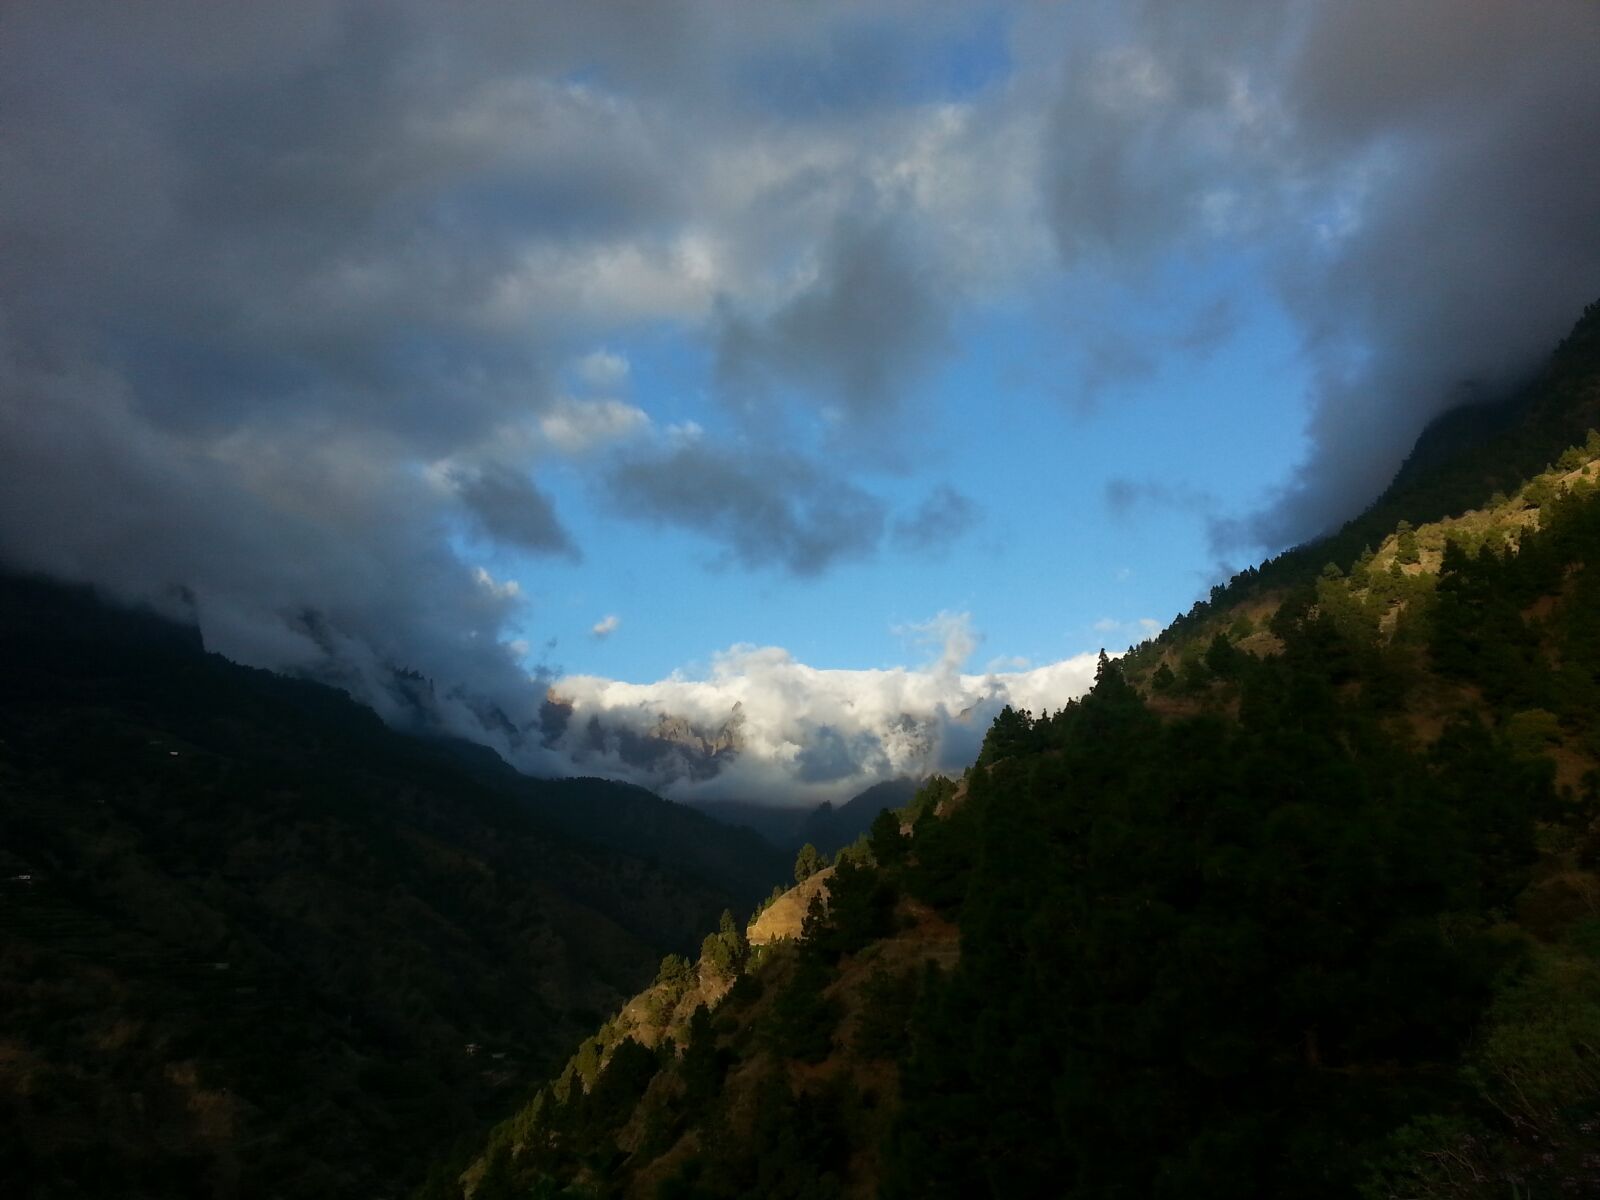 Samsung Galaxy S3 sample photo. Mountains, mountain slope, landscape photography